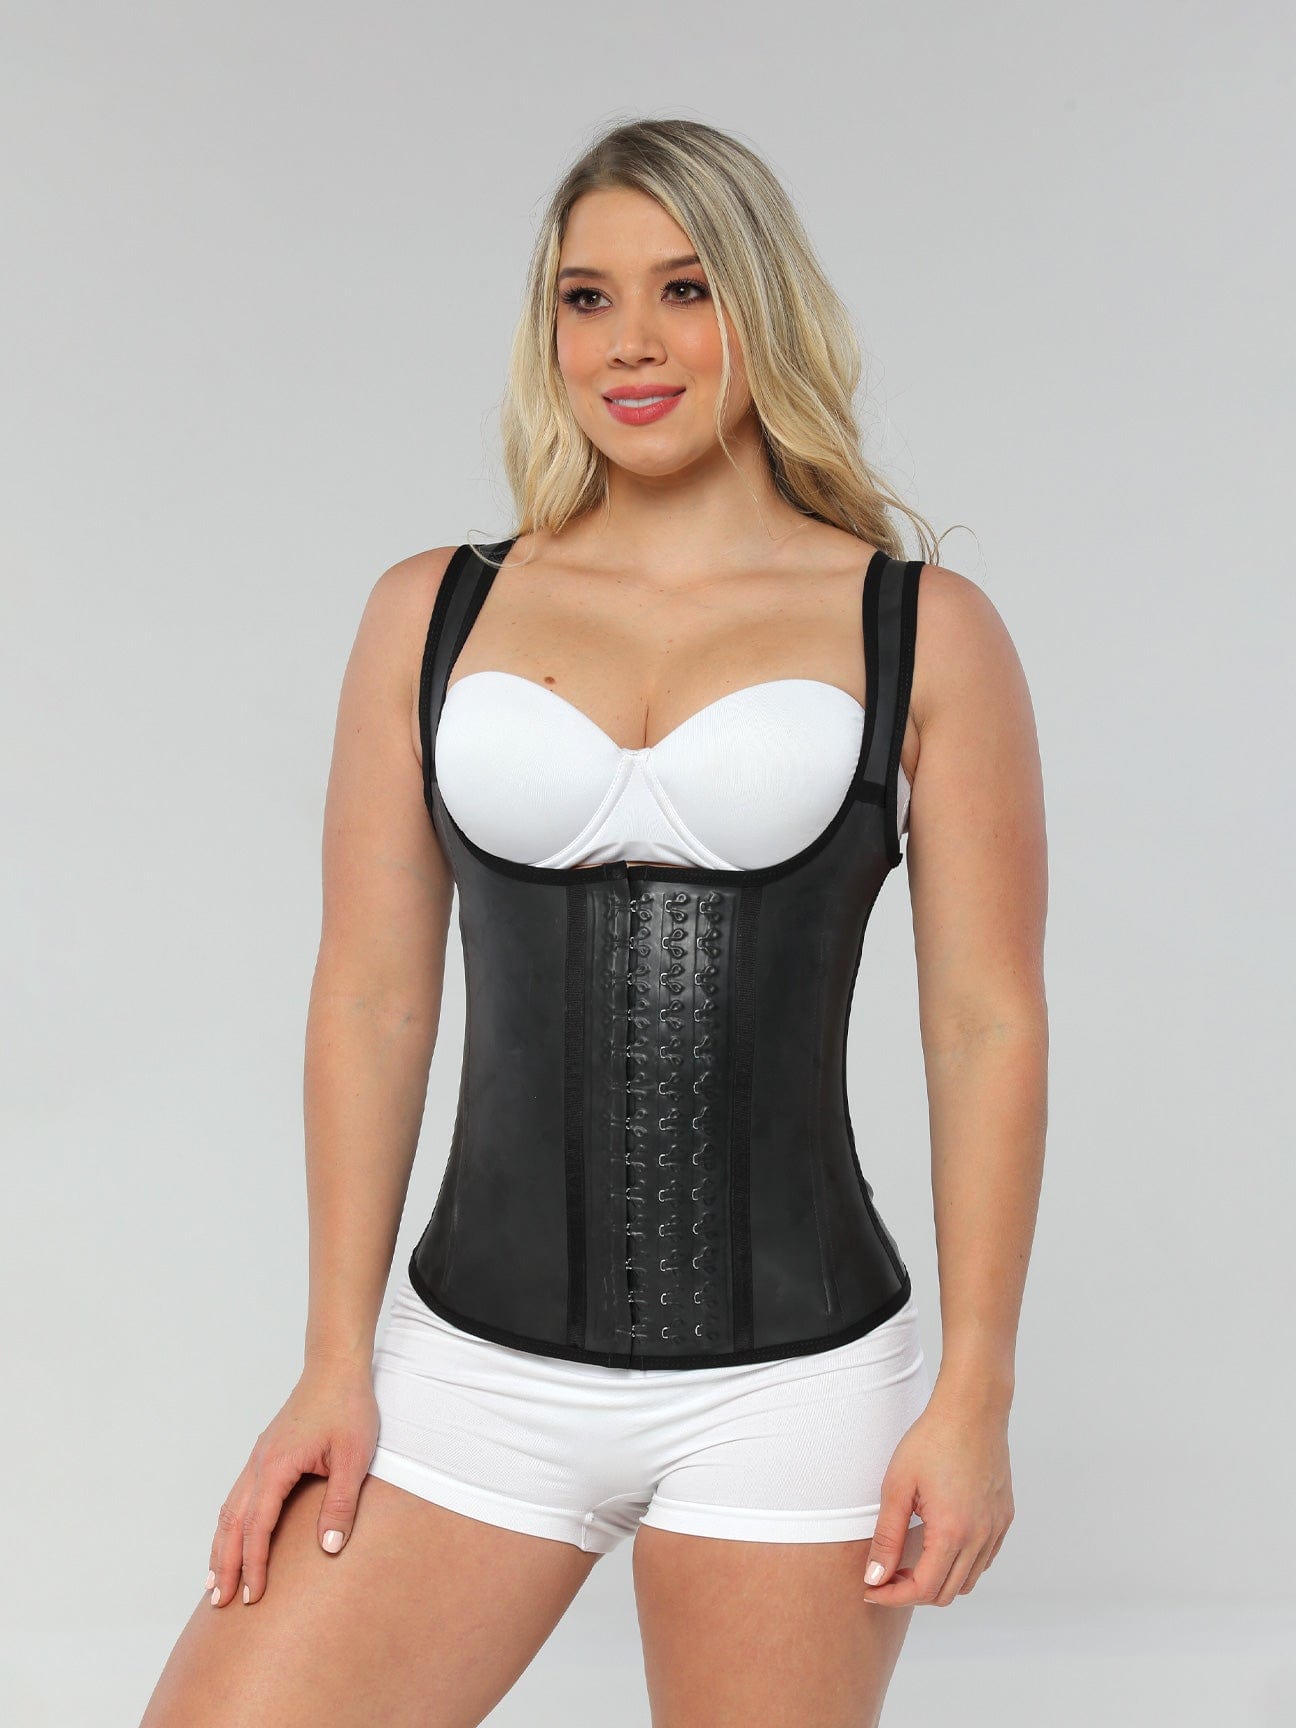 Bella Faja Girdle Body Suit with front zipper  Waist training corsets  Toronto, Butt Lifters, Thermal Latex Body